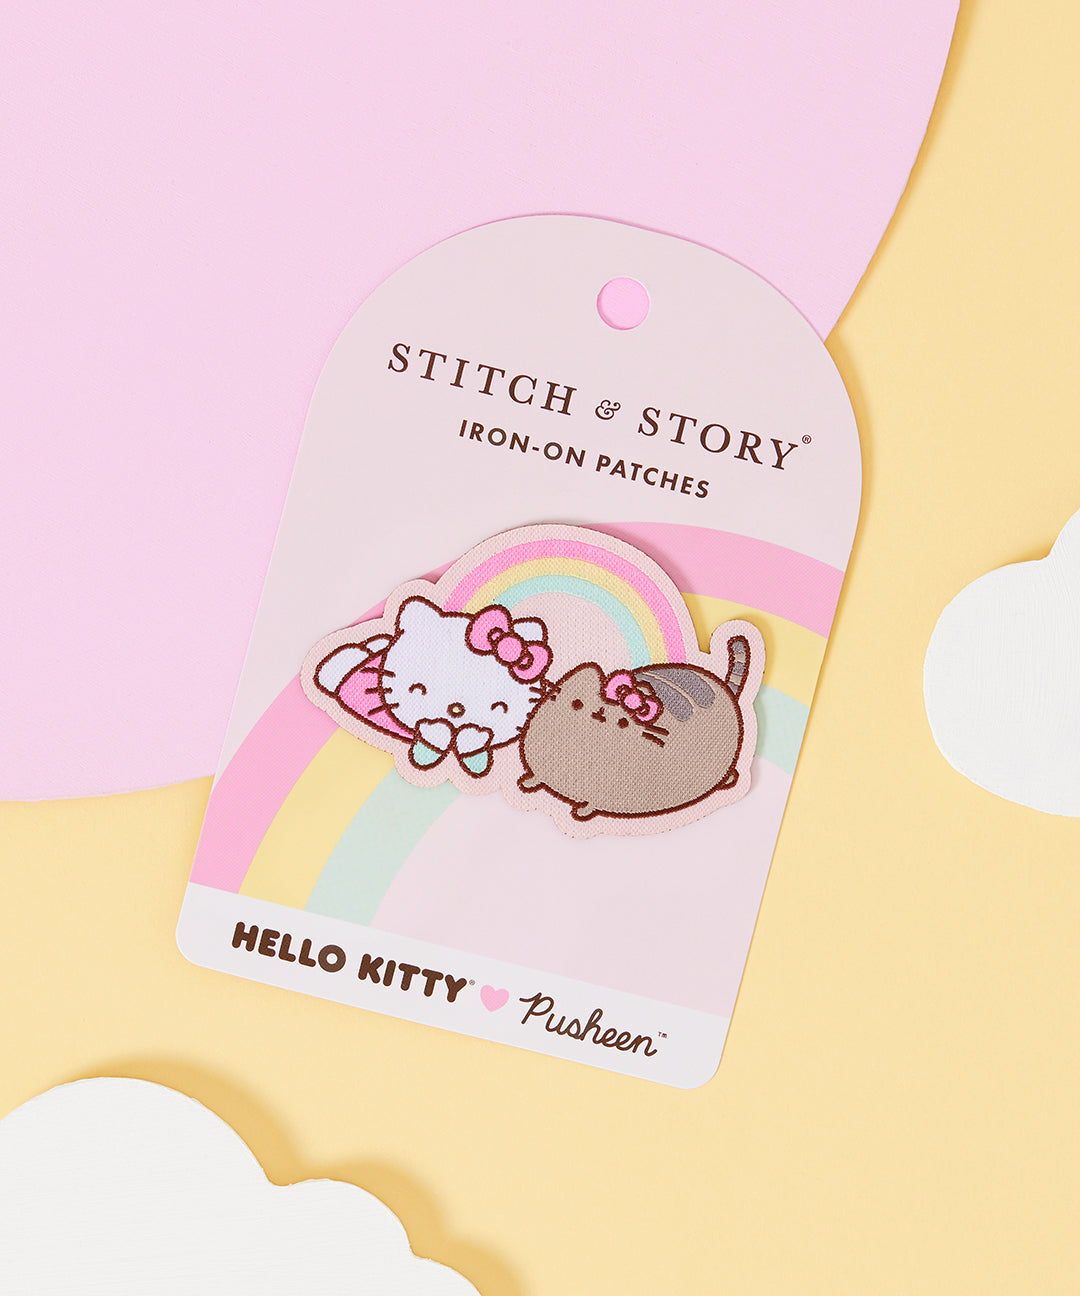 Hello Kitty Patches 